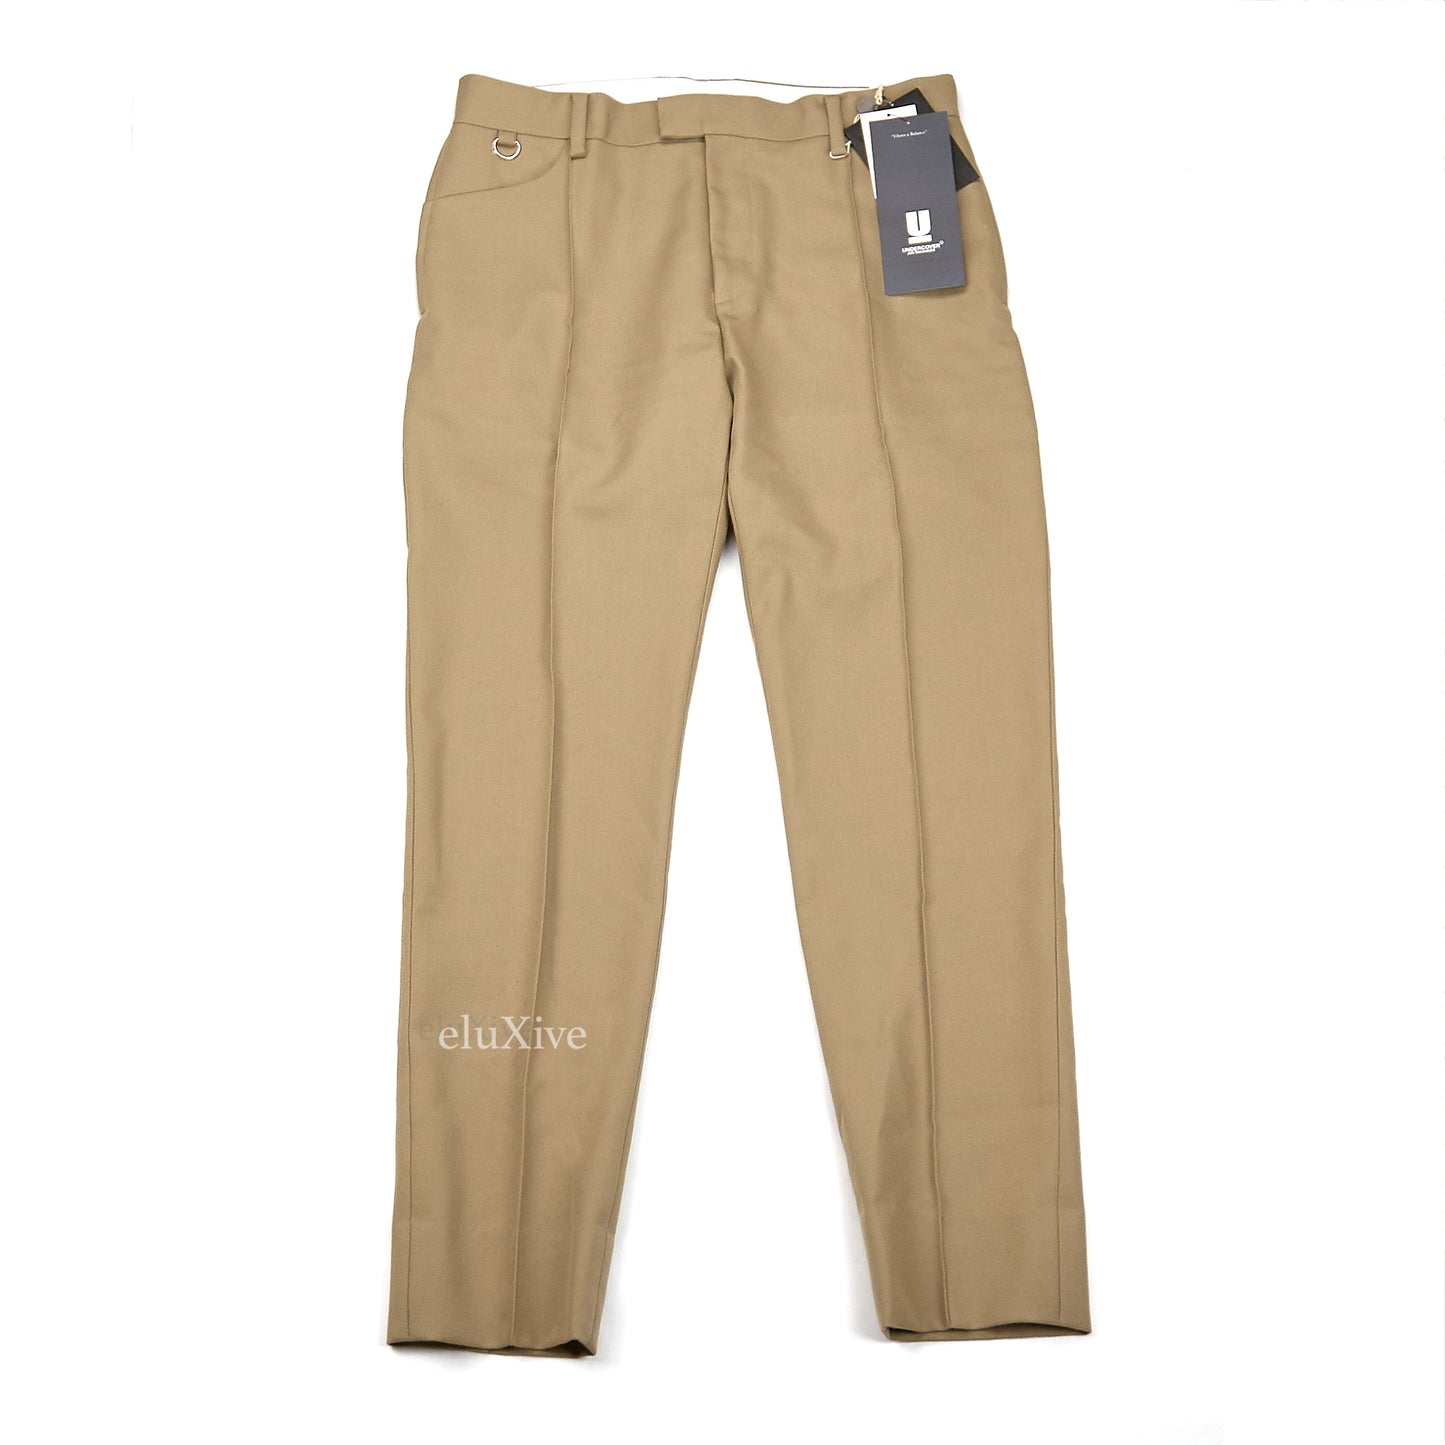 Undercover - Tan Front Stitch Pants